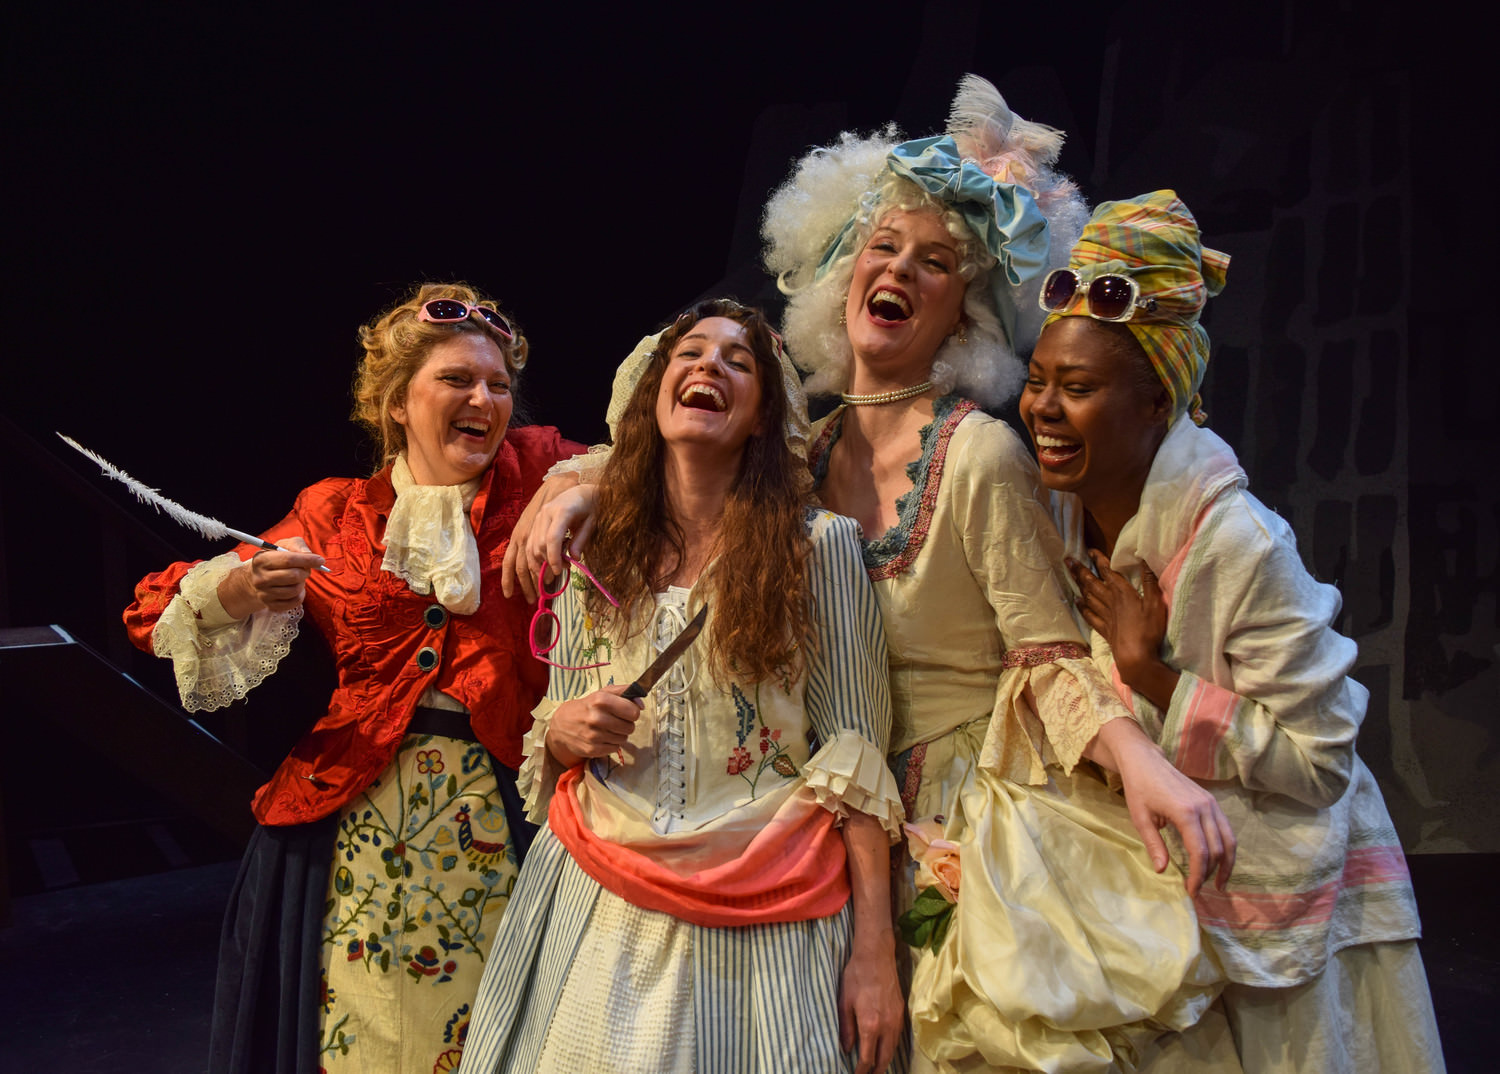 The cast of The Revolutionists by Lauren Gunderson at The Public Theatre in Maine. From left to right: Janet Mitchko, Sherill Turner, Robyne Parrish and Shamika Cotton. 1